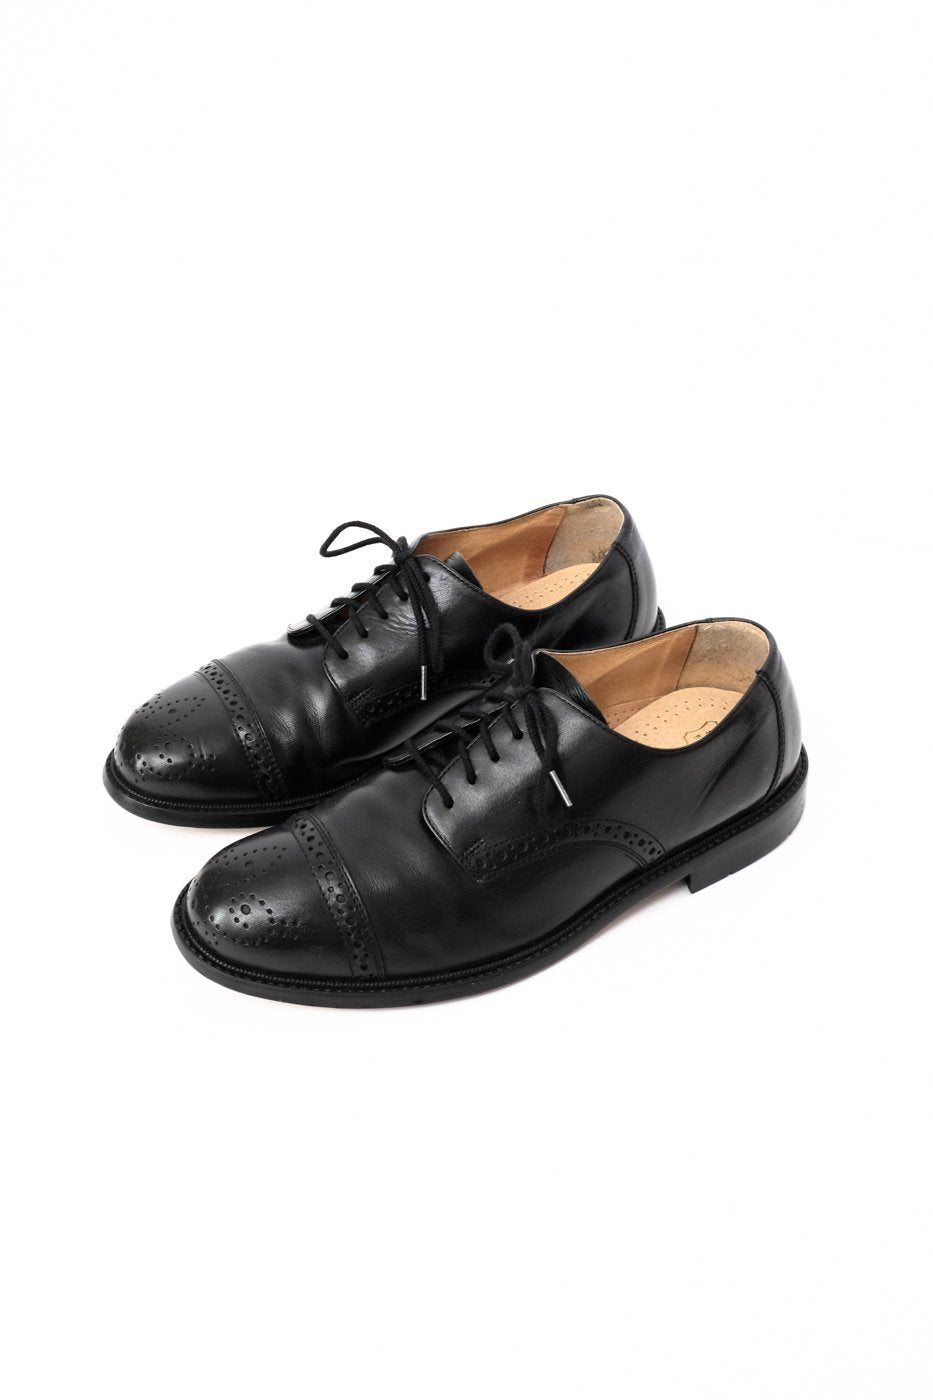 0402_BLACK 42 BUDAPESTER LEATHER BROGUES